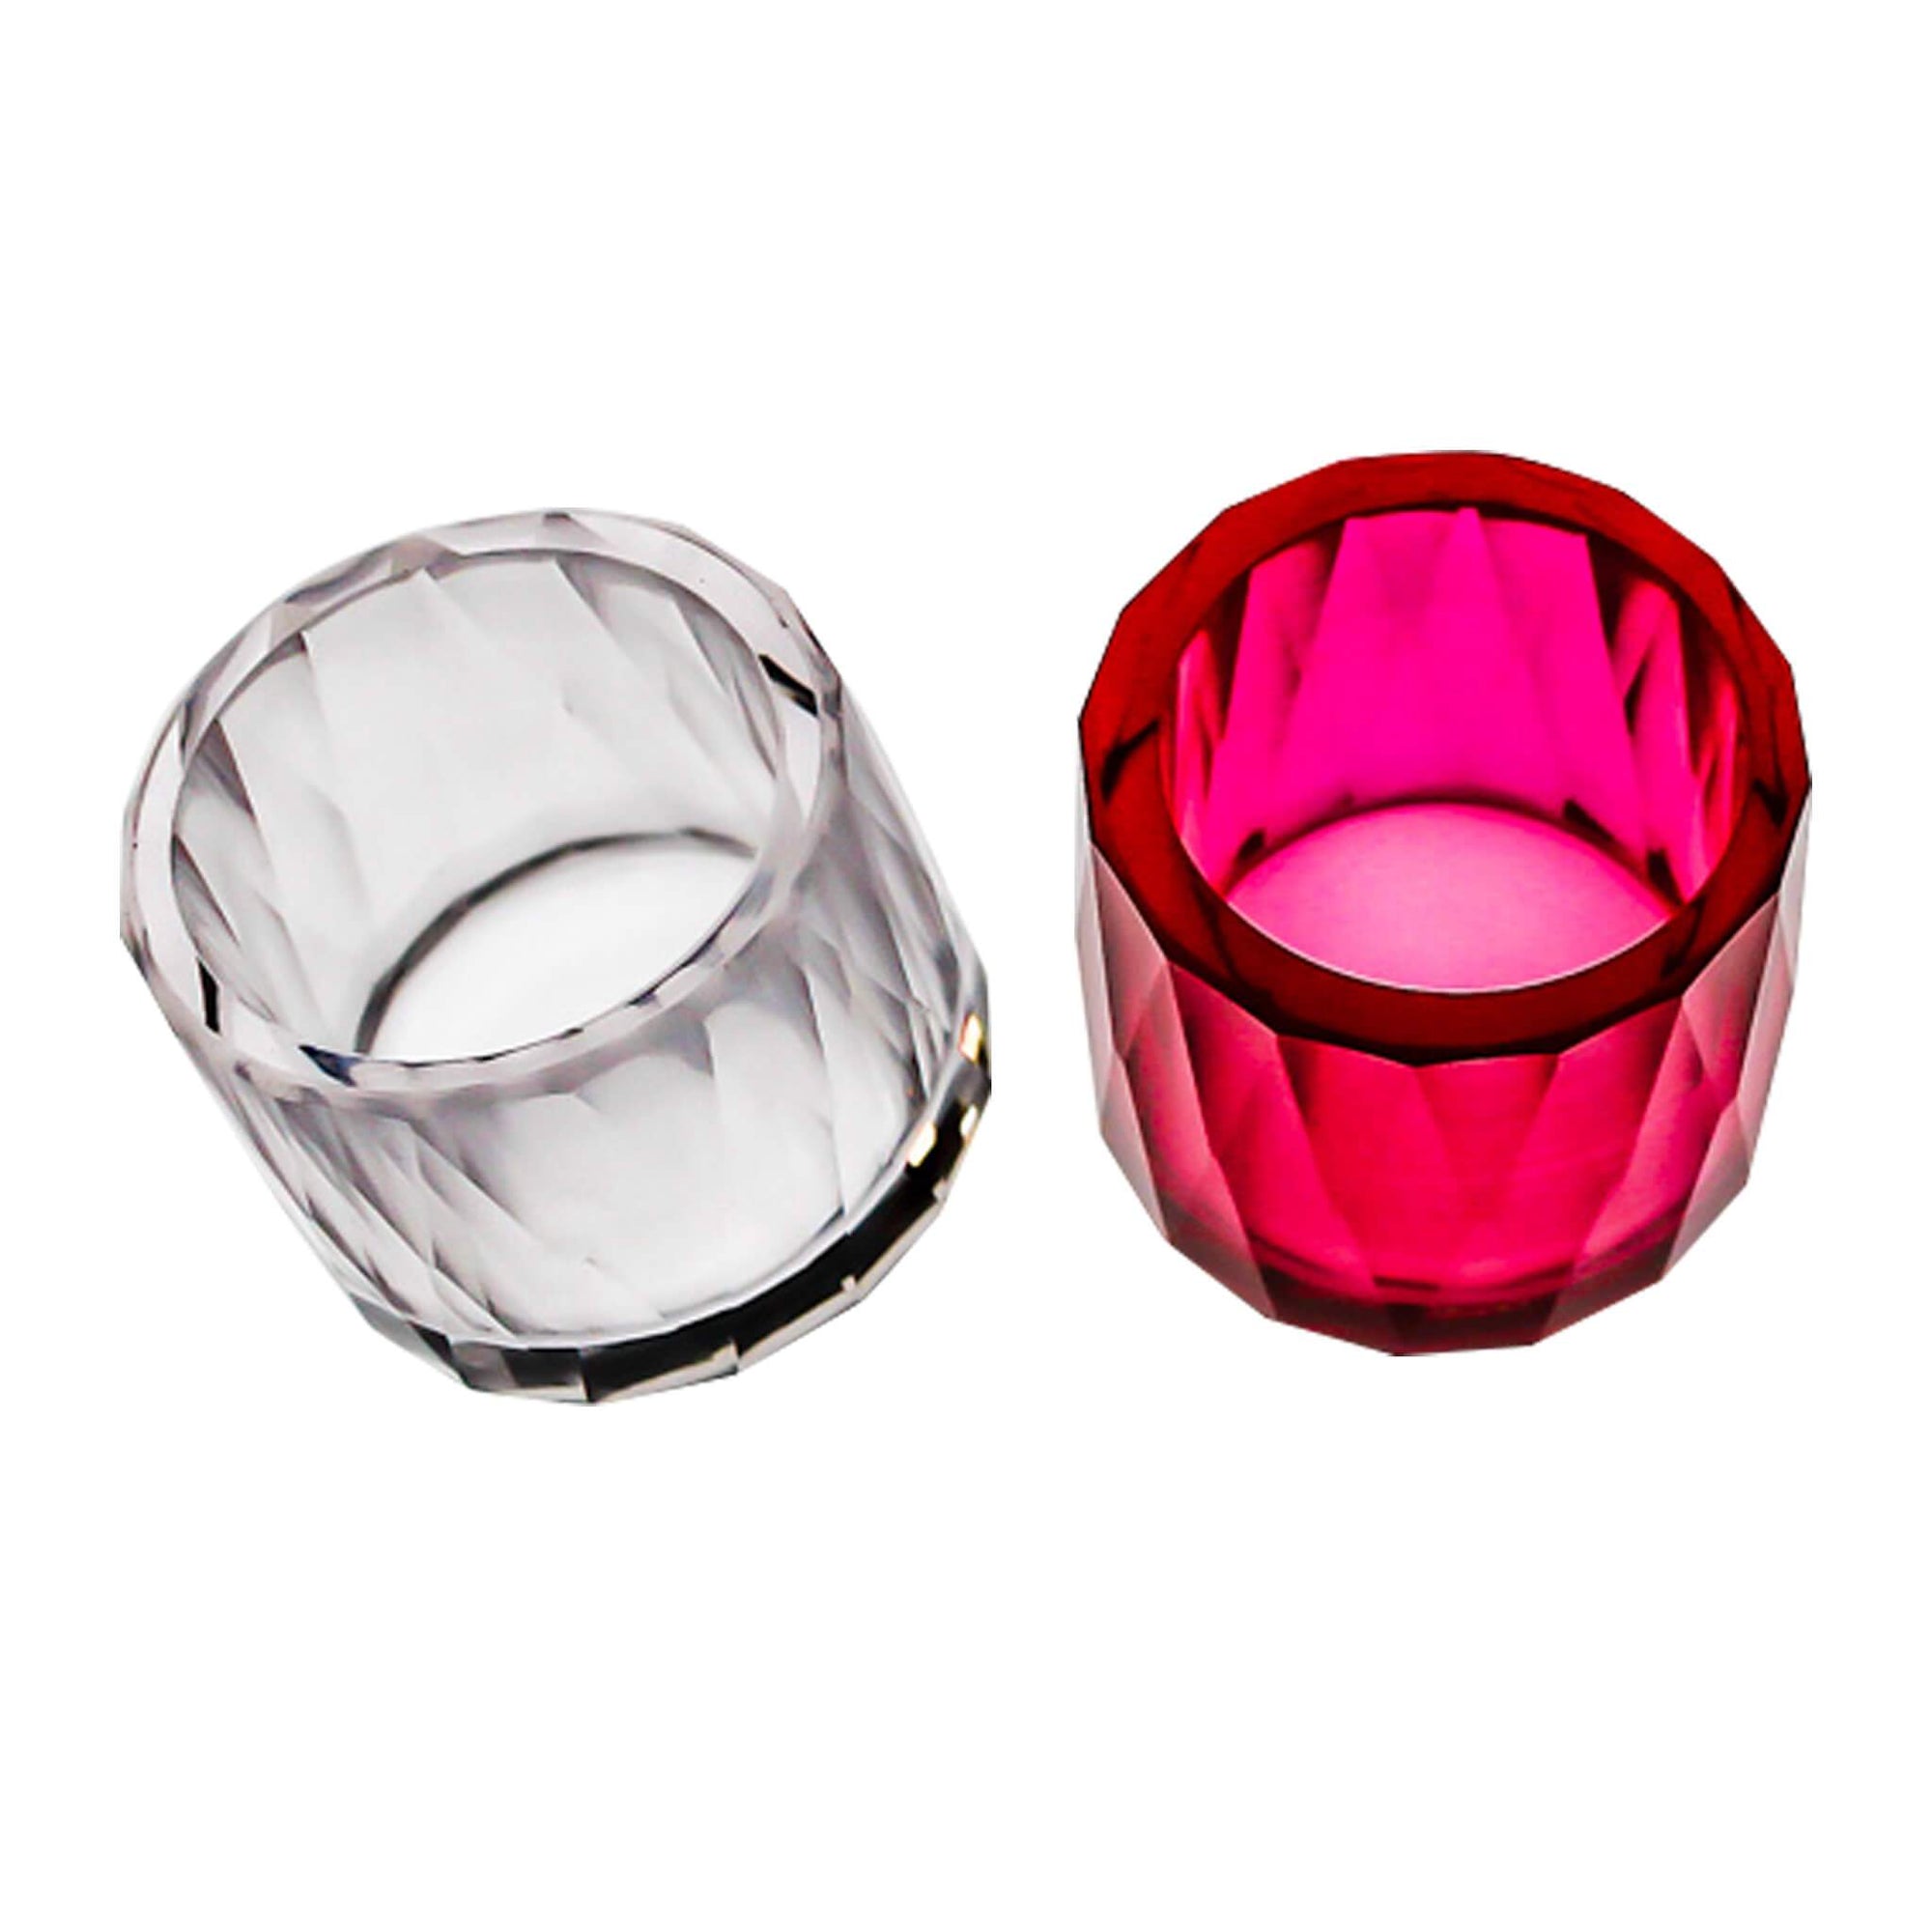 25mm Faceted Ruby Insert Cup | Ruby & Sapphire View | the dabbing specialists